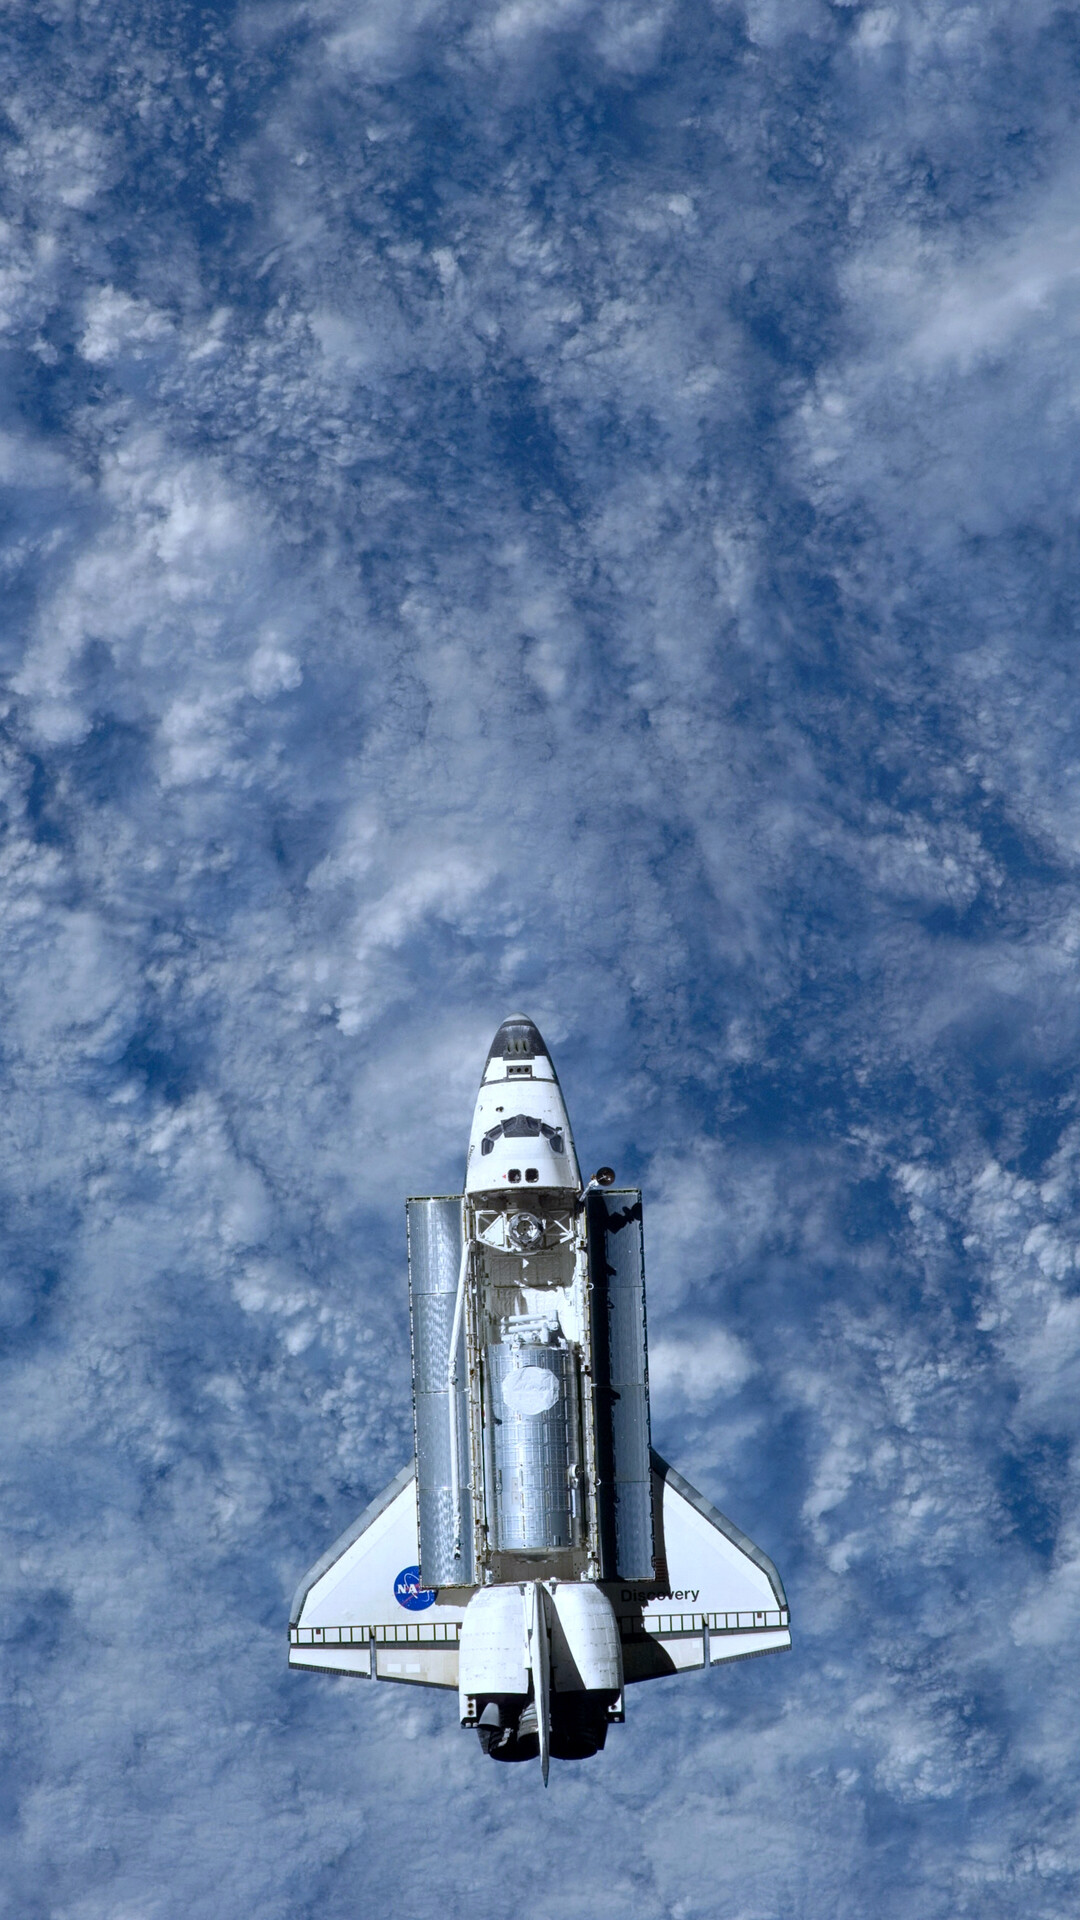 Space Shuttle: Atlantis completed the final program flight, STS-135, on July 21, 2011. 1080x1920 Full HD Wallpaper.